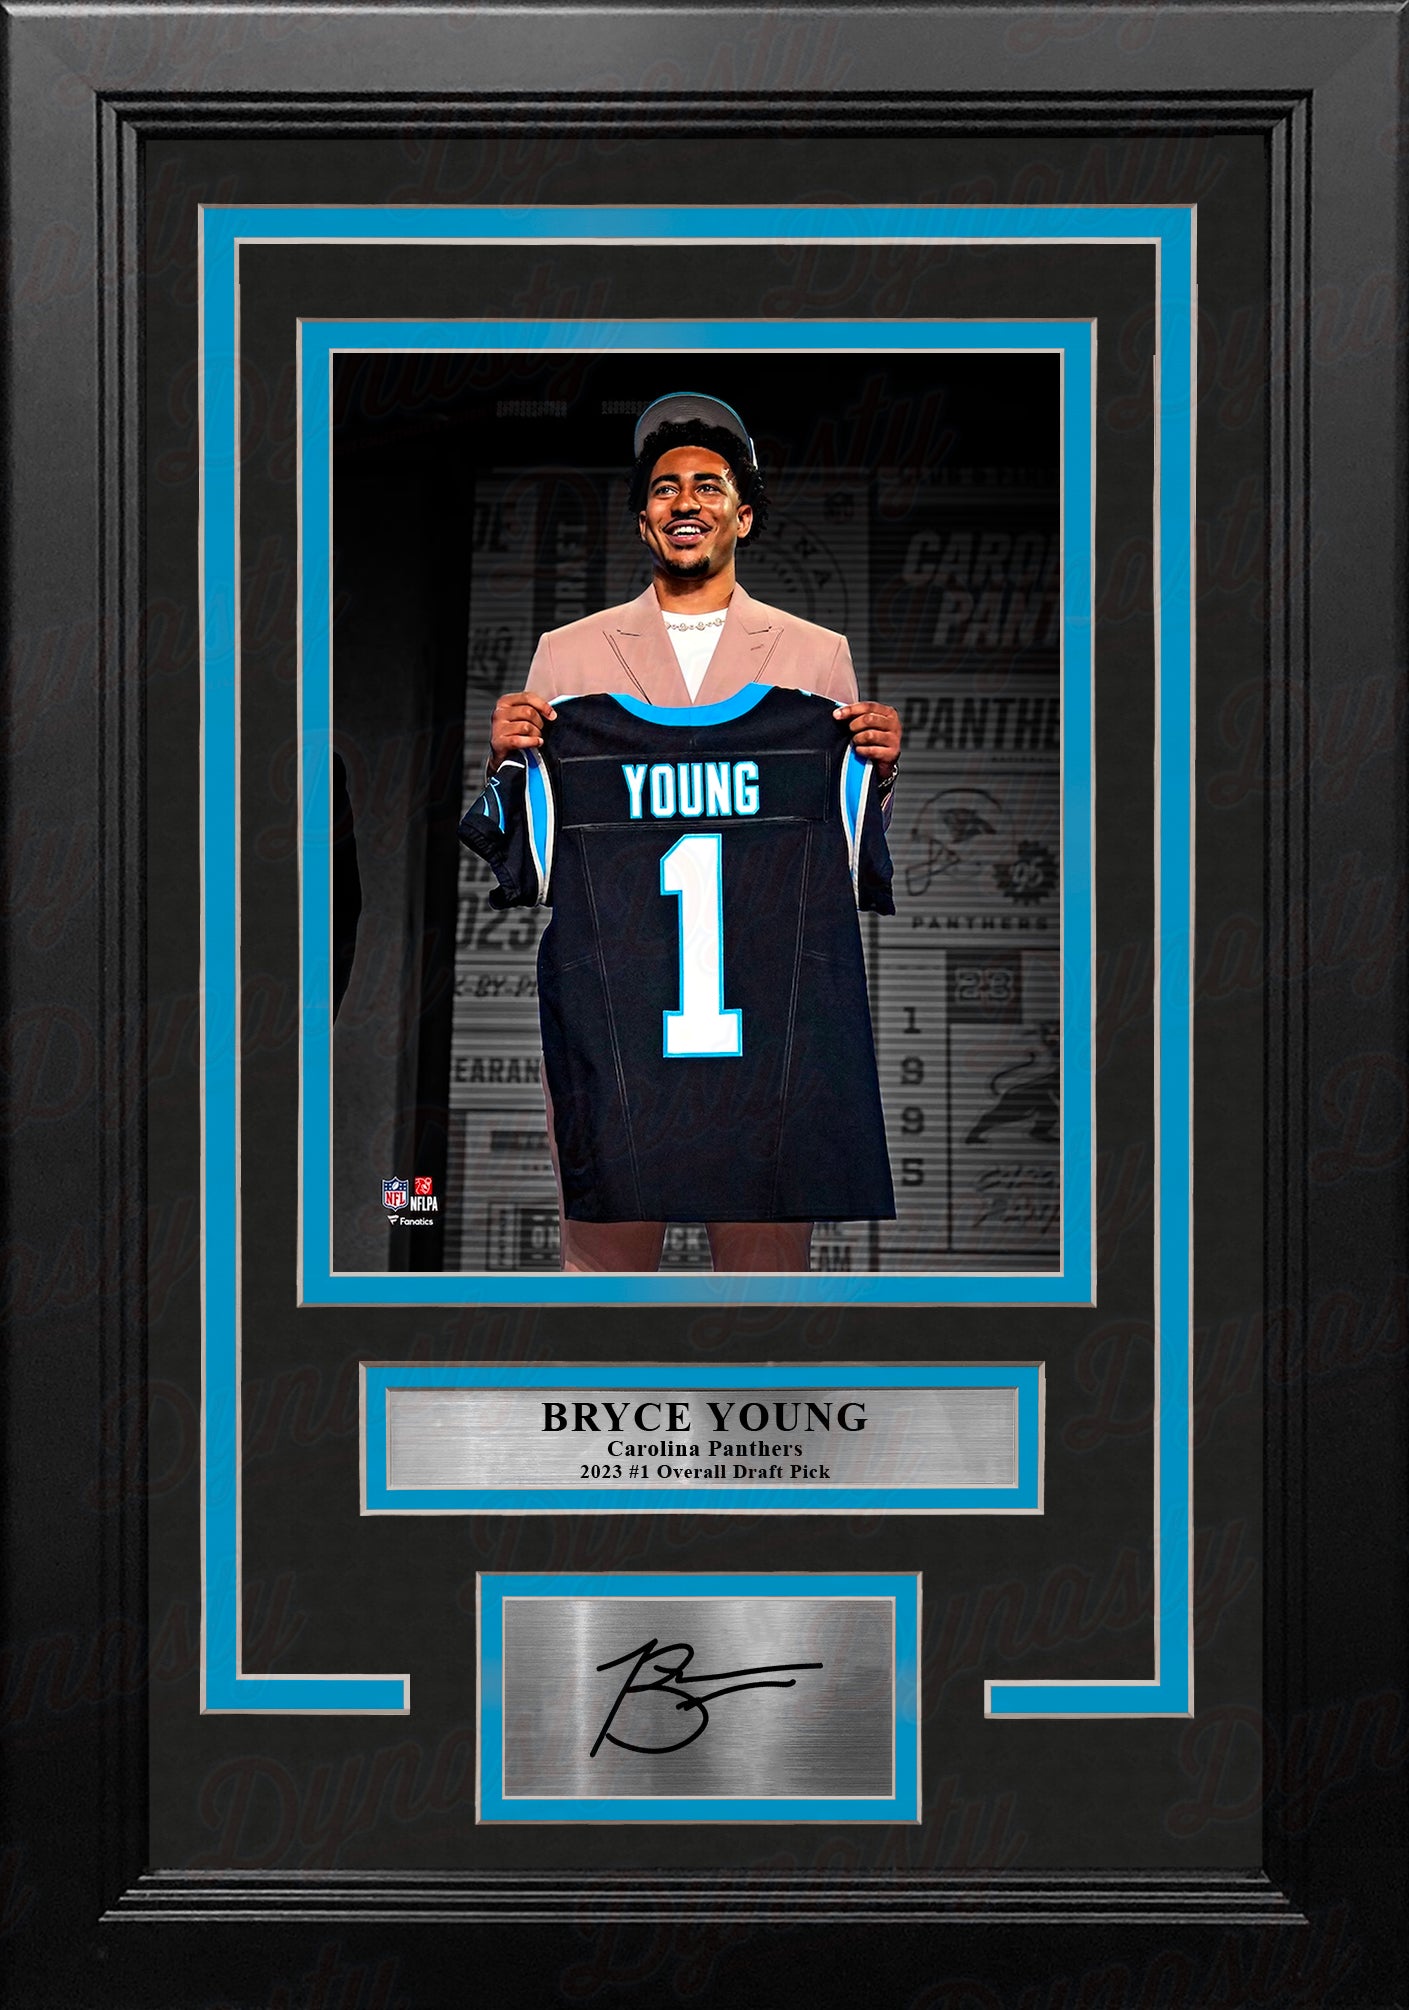 Bryce Young Carolina Panthers 8" x 10" Framed Draft Football Photo with Engraved Autograph - Dynasty Sports & Framing 